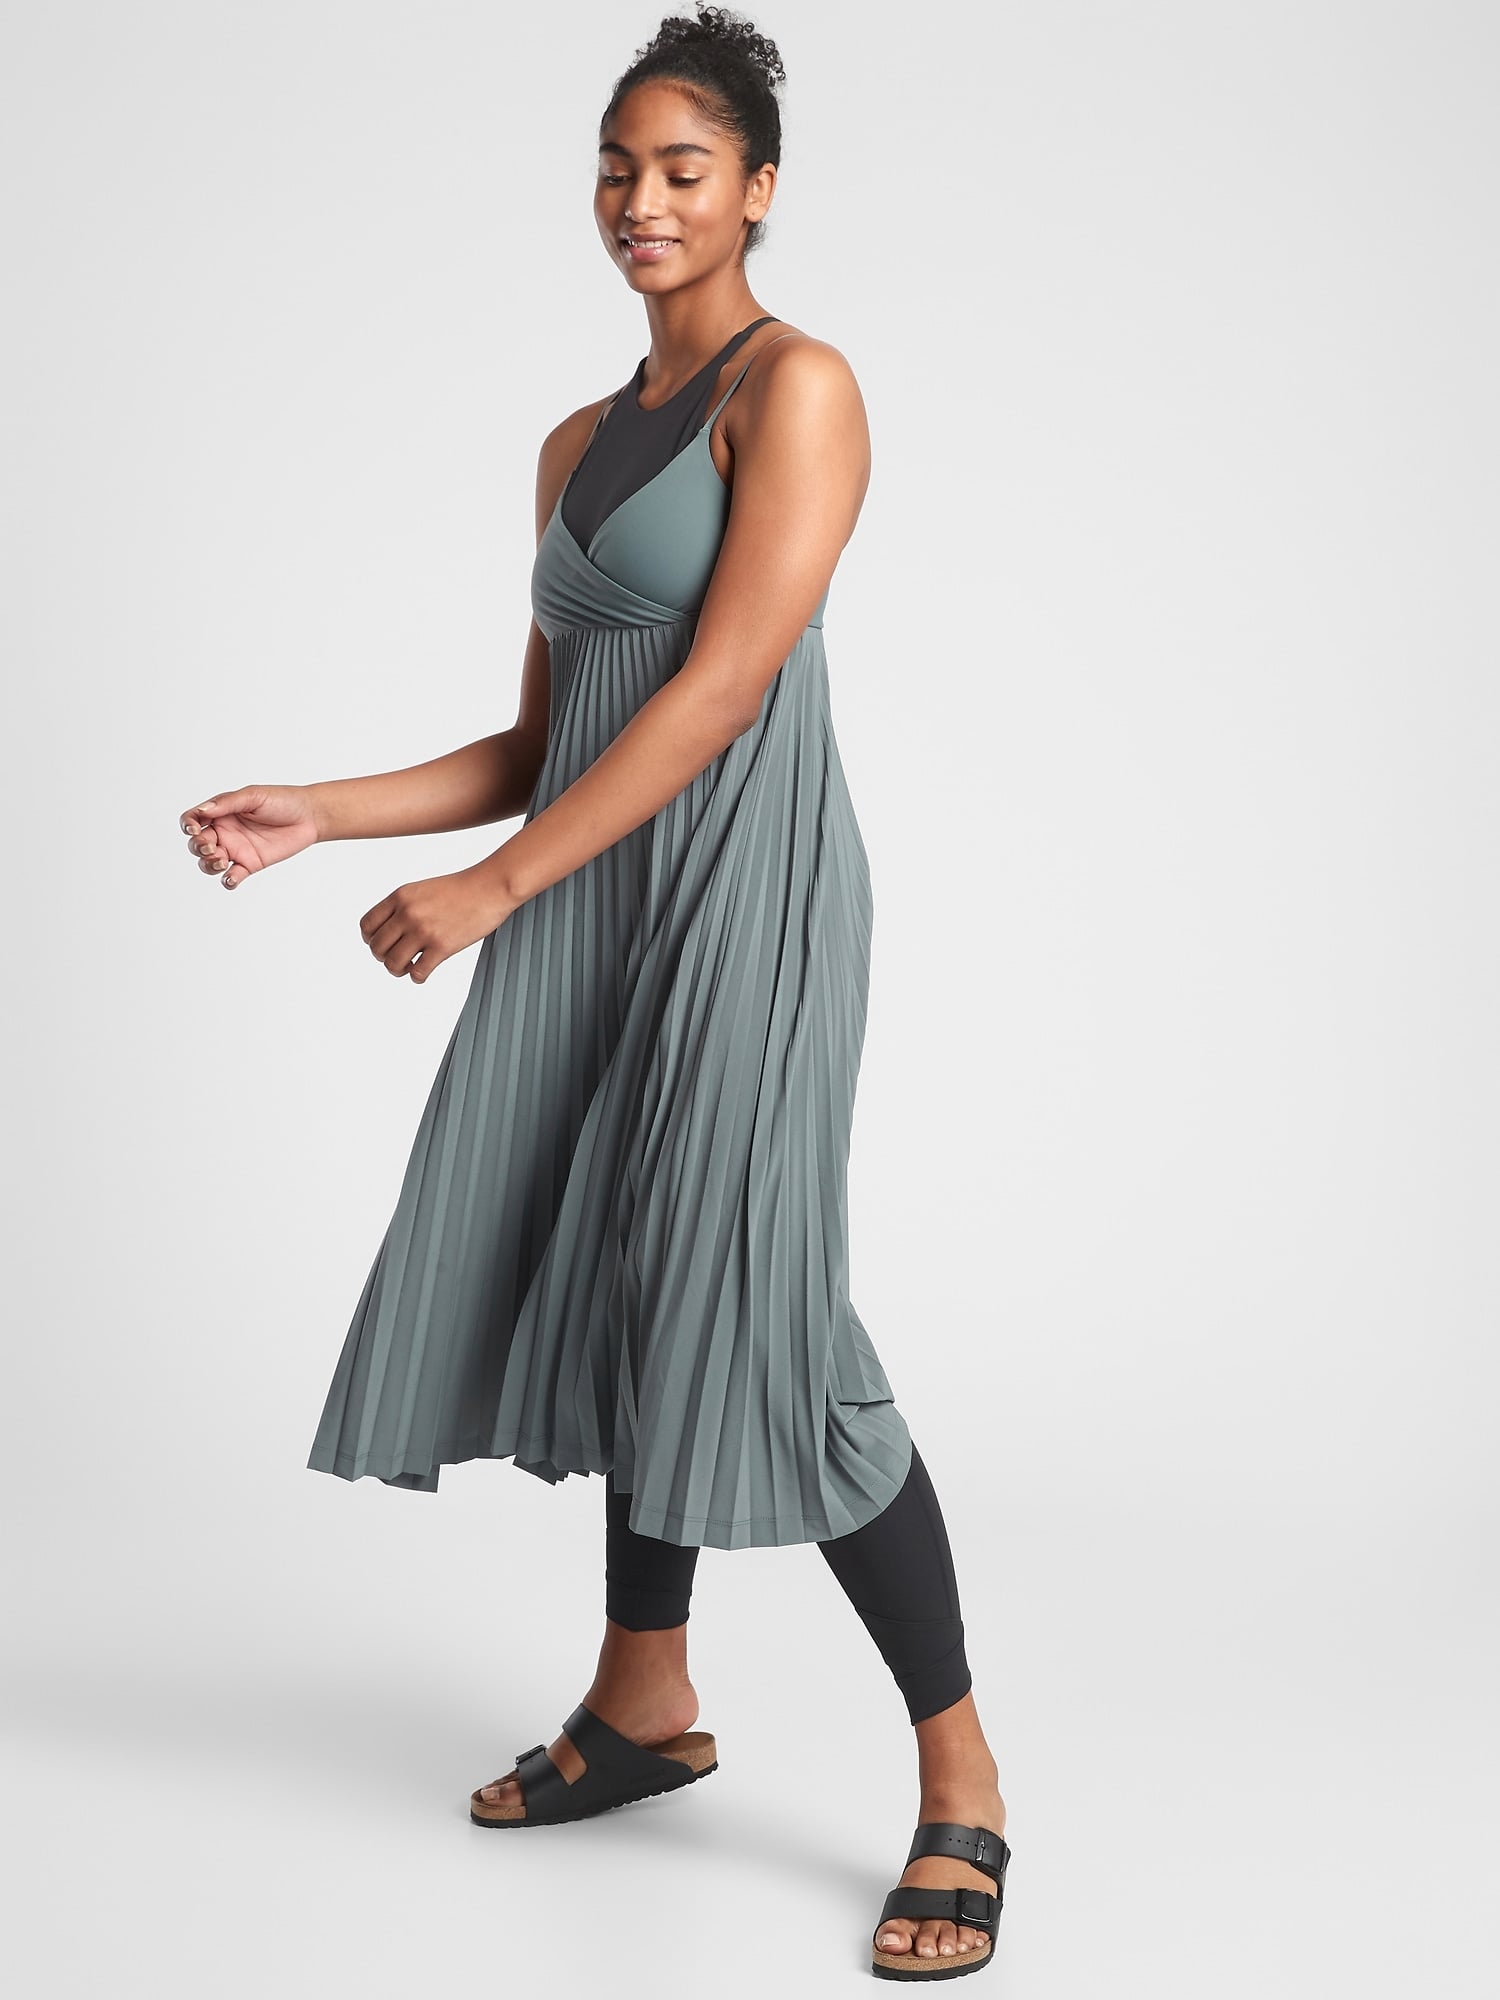 The Most Comfortable Dresses and Jumpsuits From Athleta